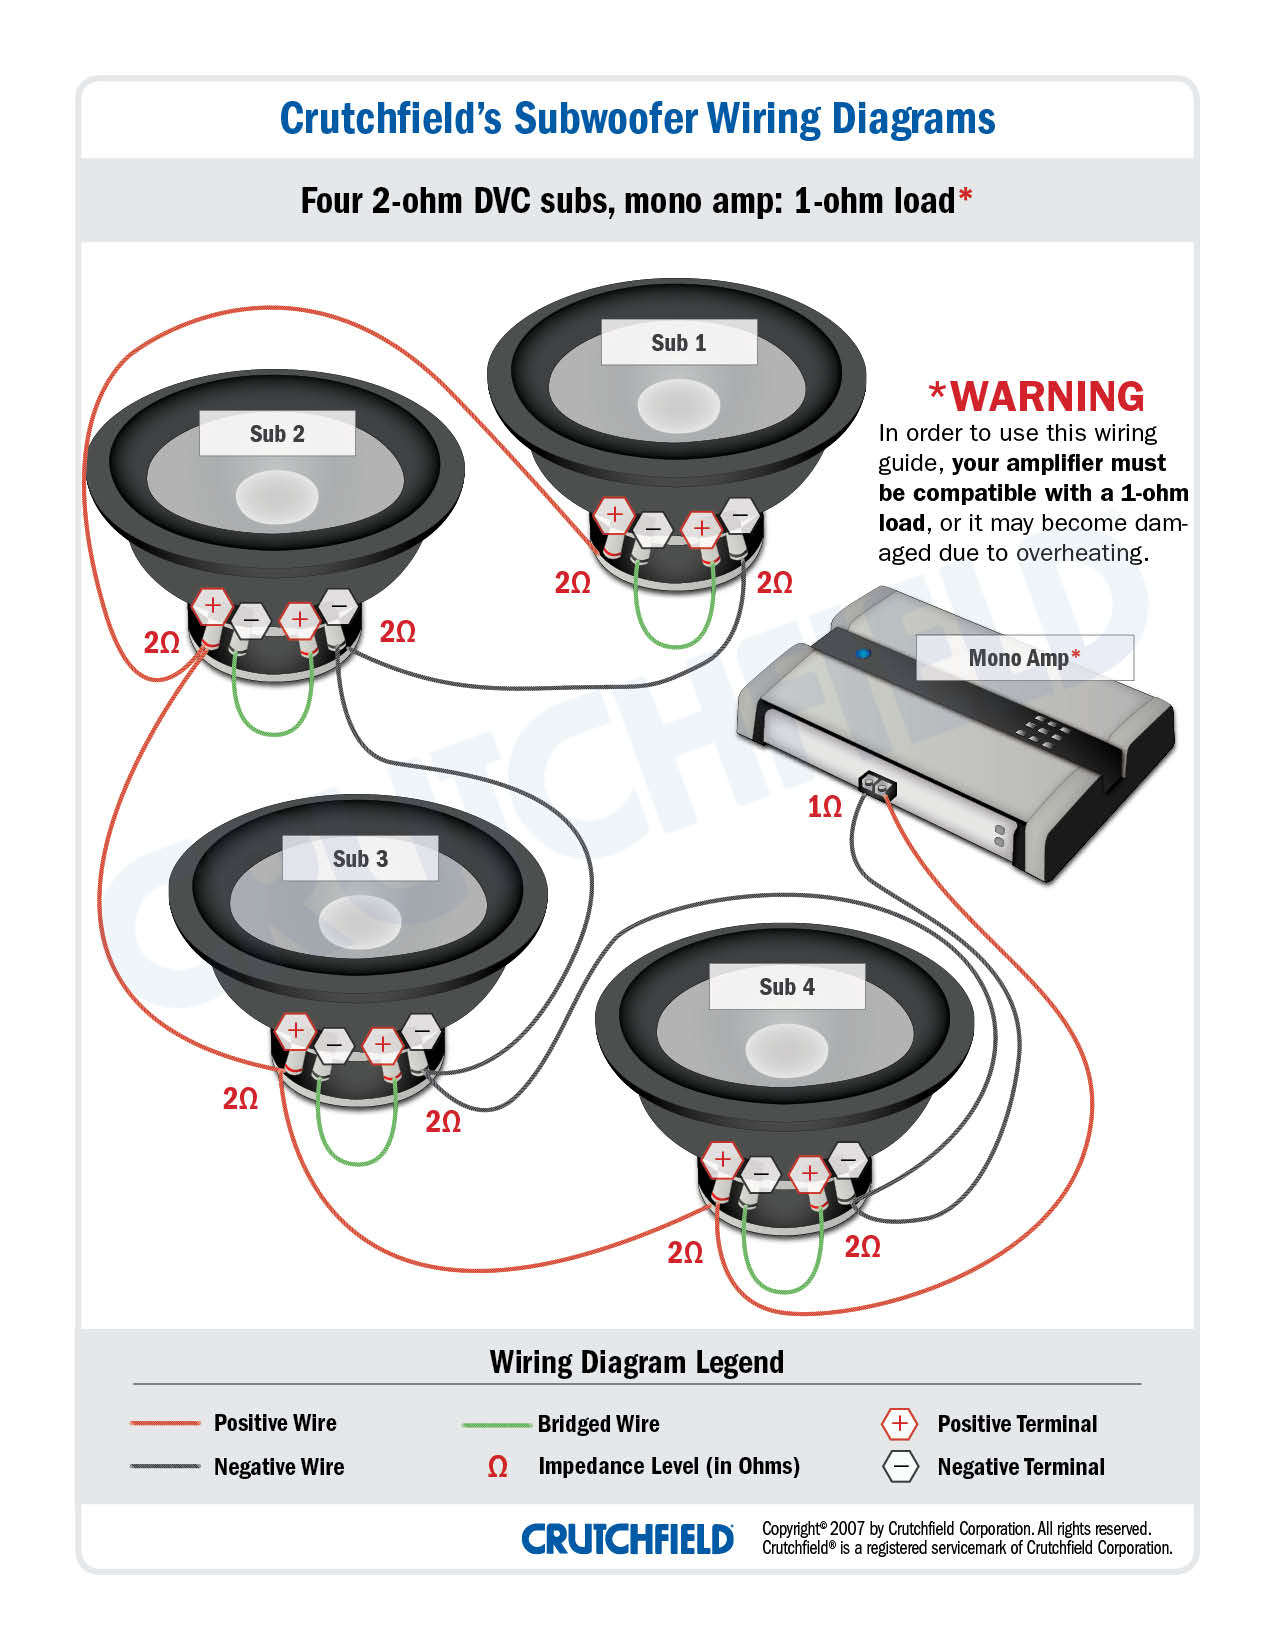 Wiring Subwoofers — What's All This About Ohms?  2 Ohm Load Wiring Diagram    Crutchfield